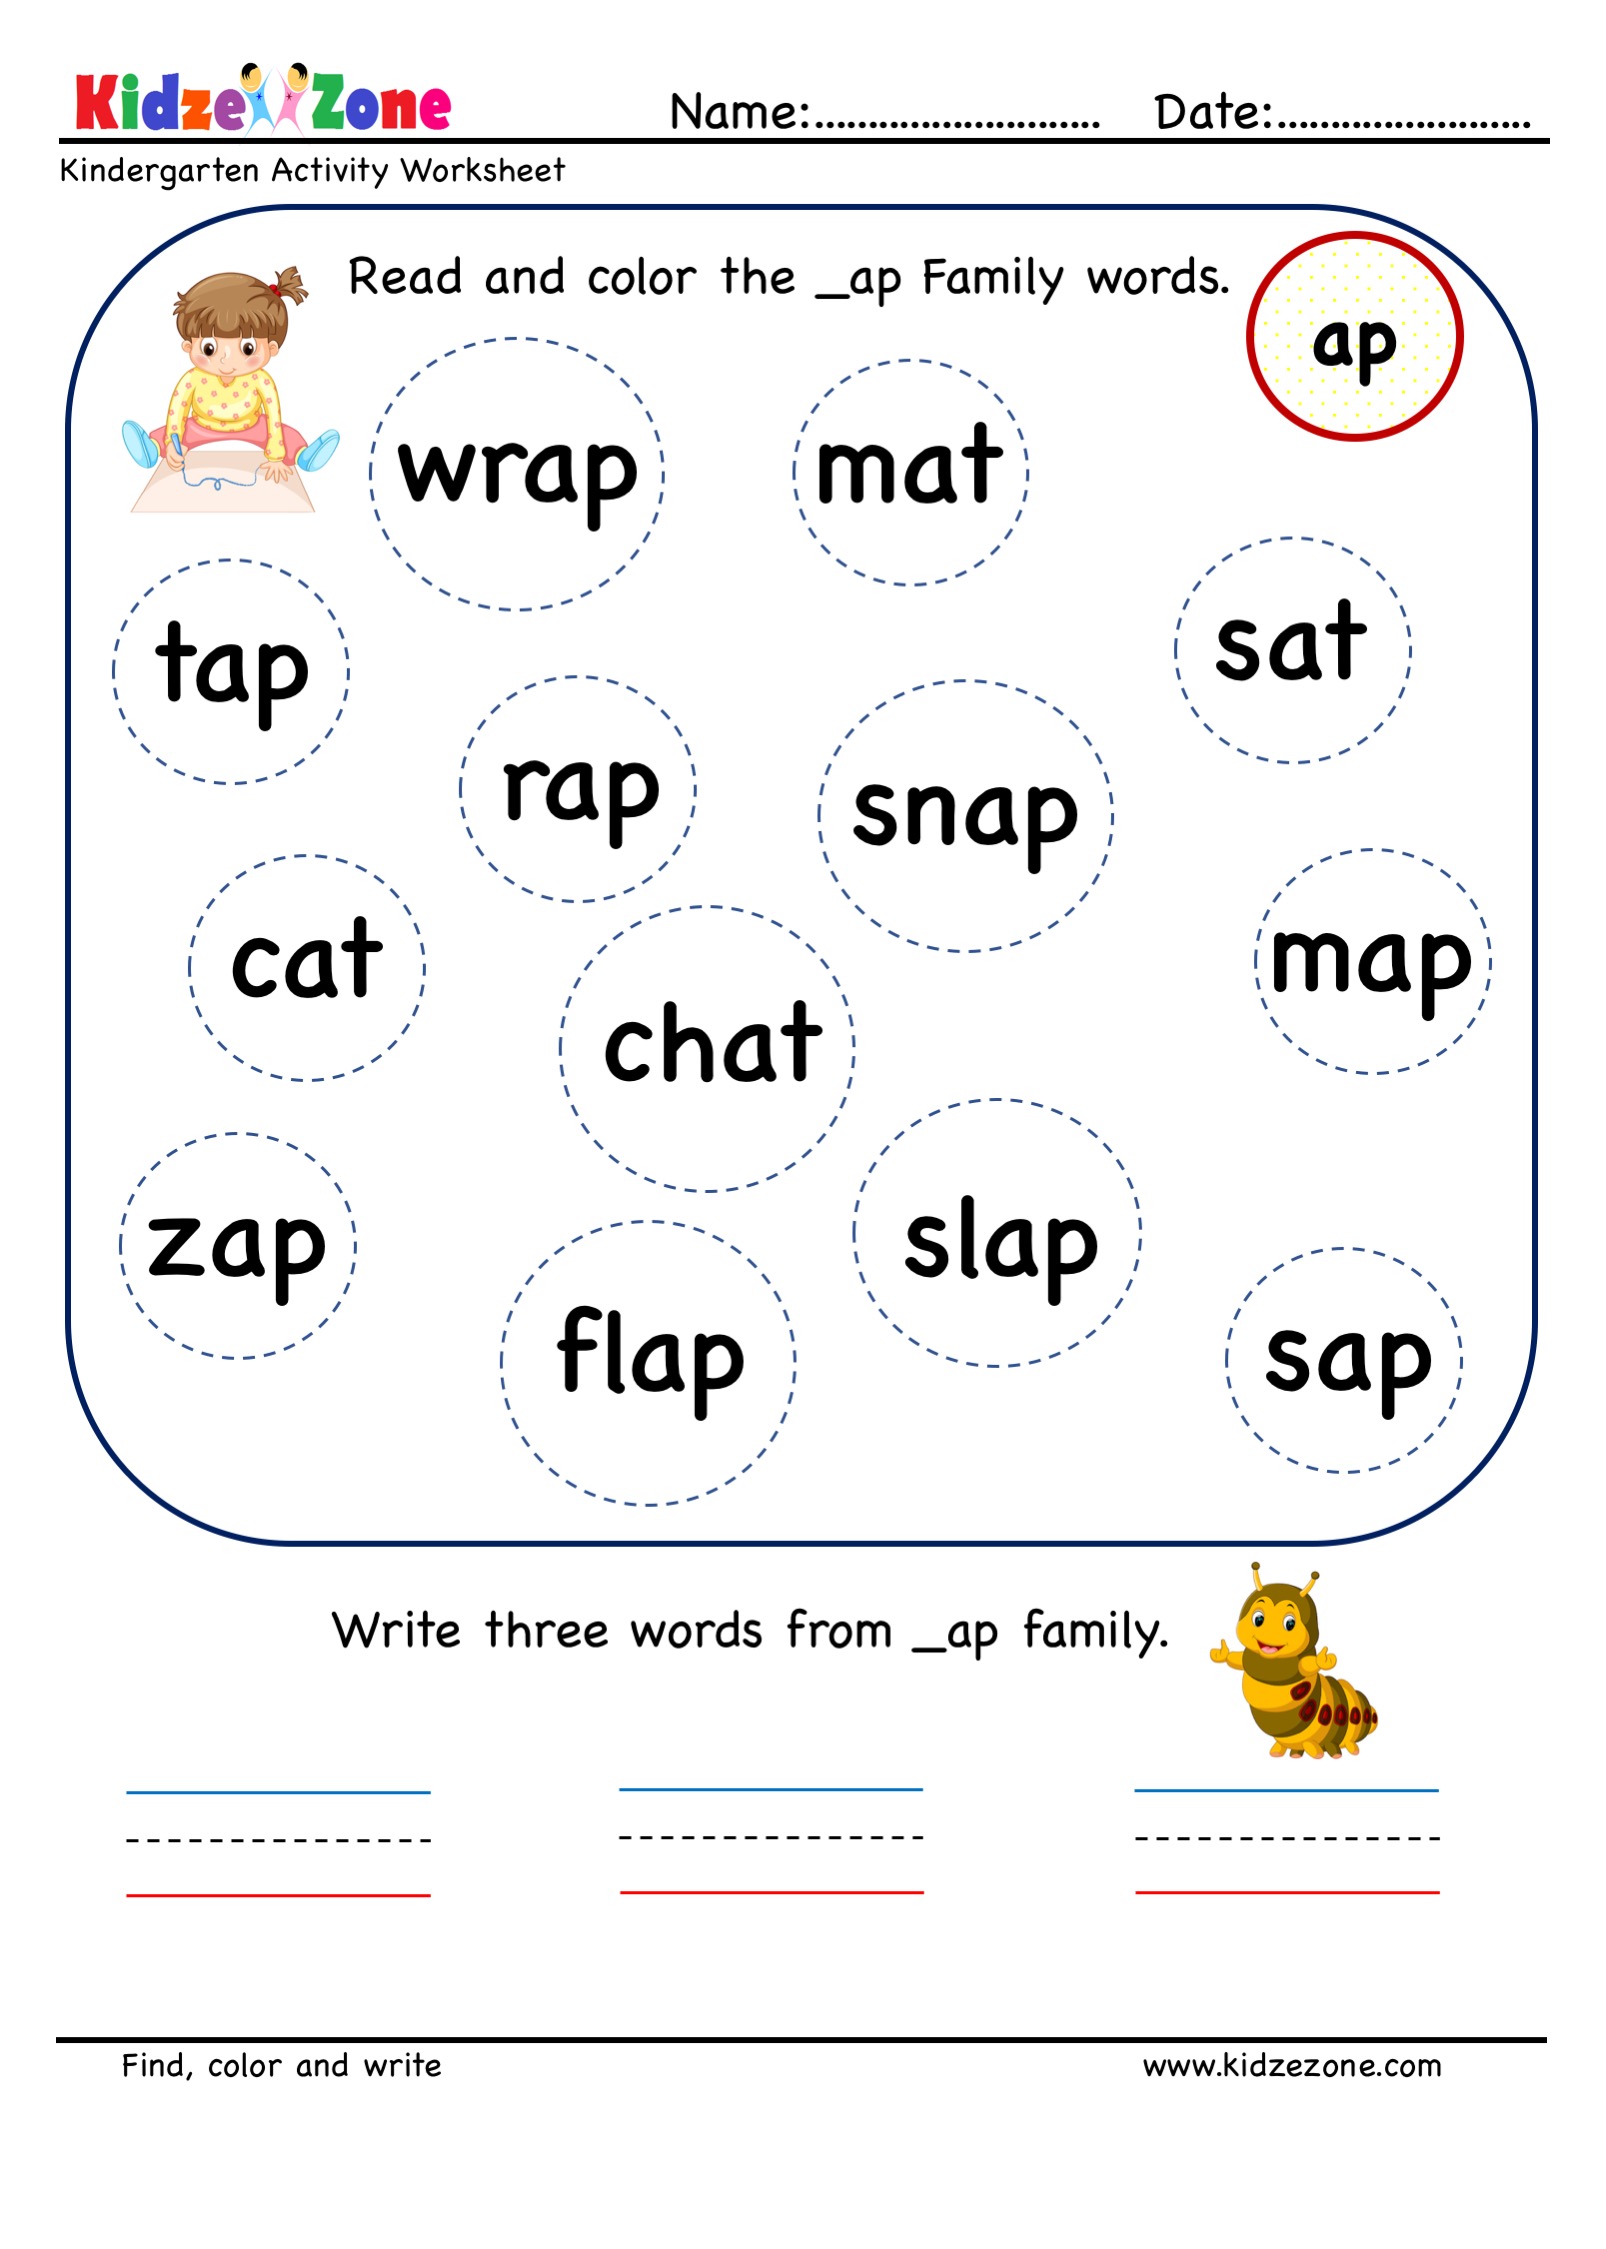 ap word family find and color worksheet 2 KidzeZone